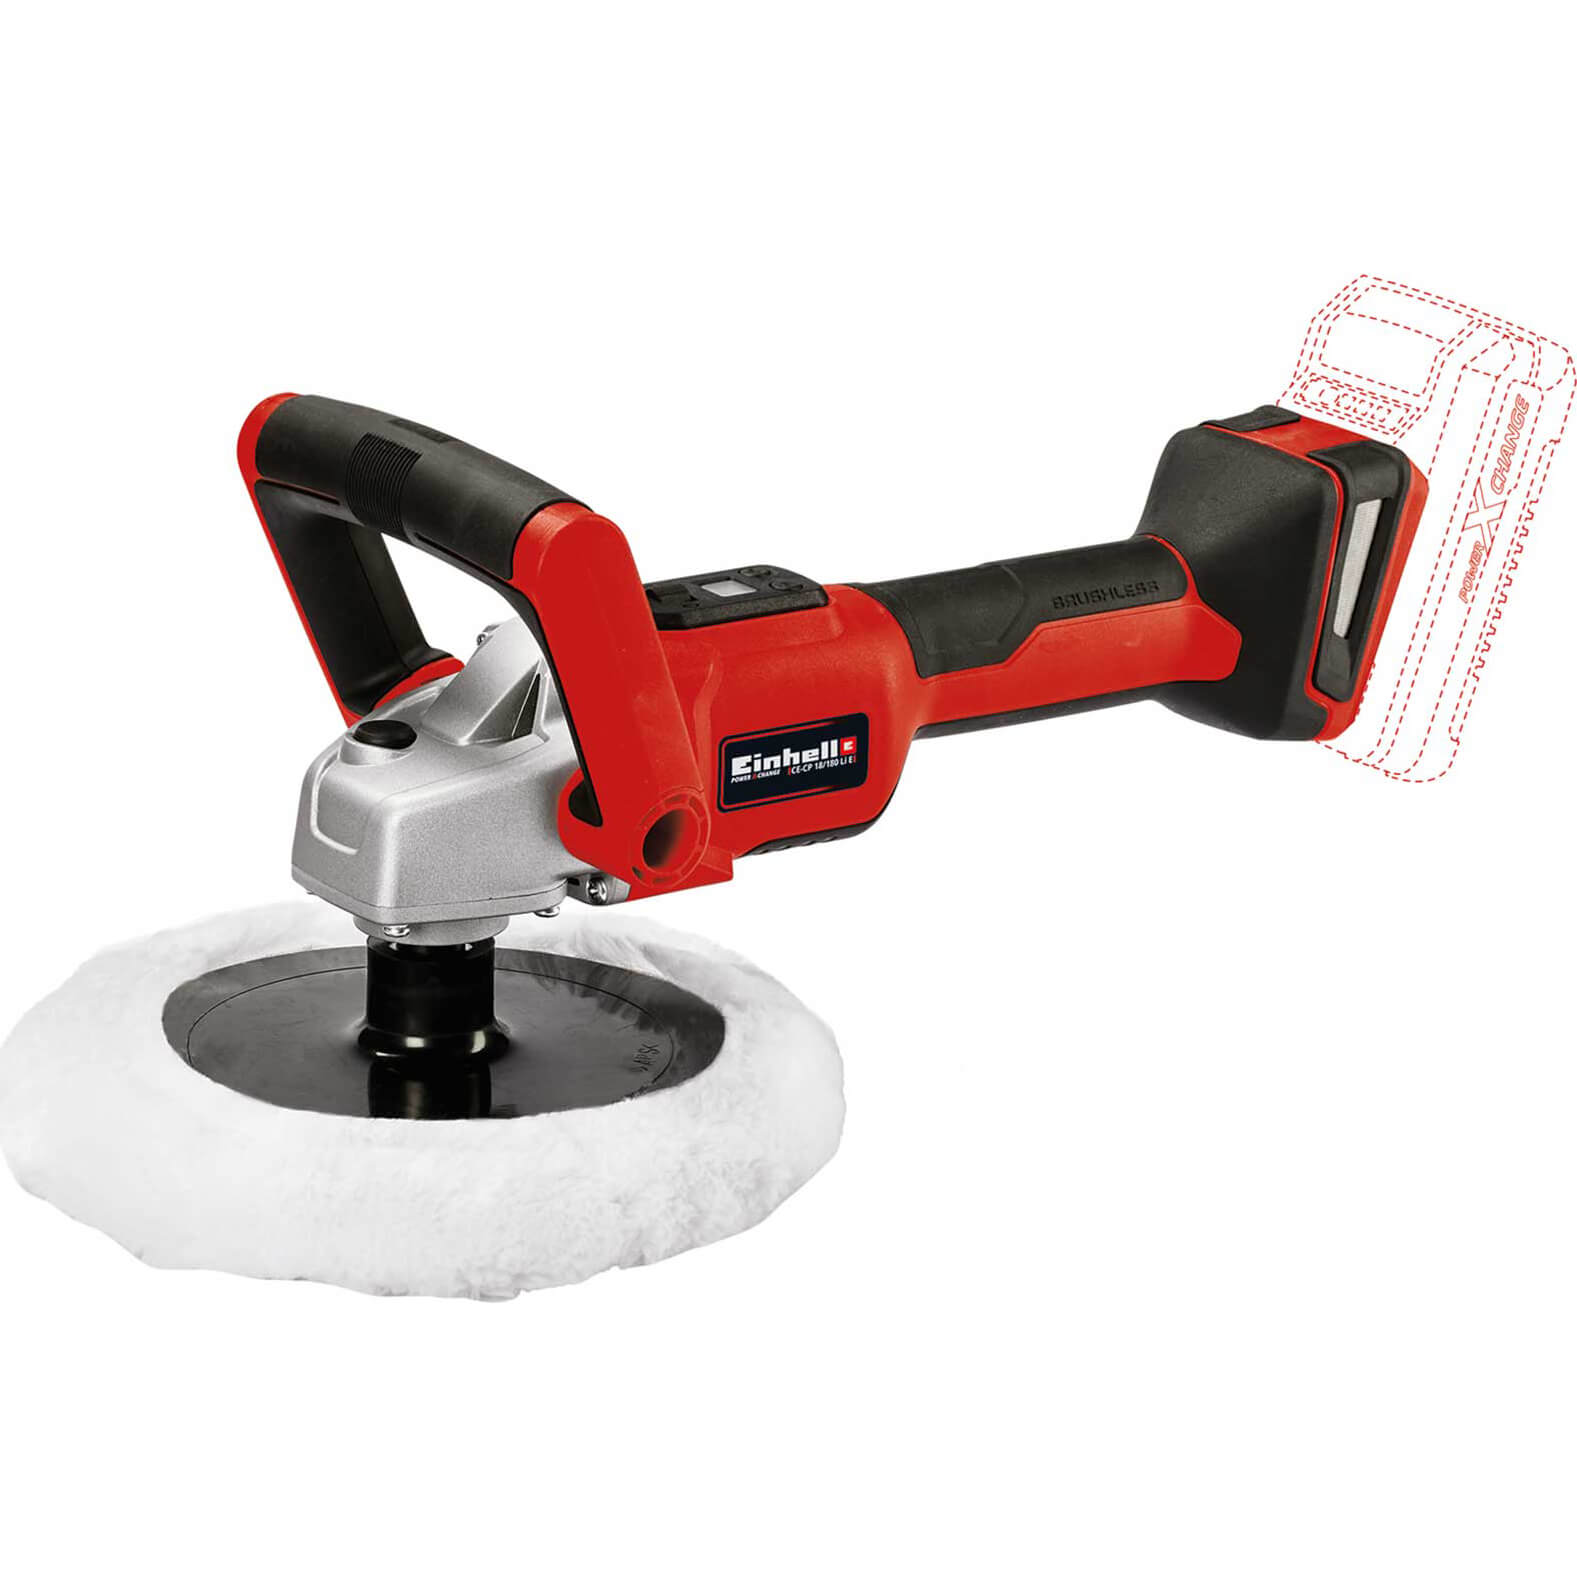 Einhell CE-CP 18/180 Li 18v Cordless Polisher and Sander 180mm No Batteries No Charger No Case